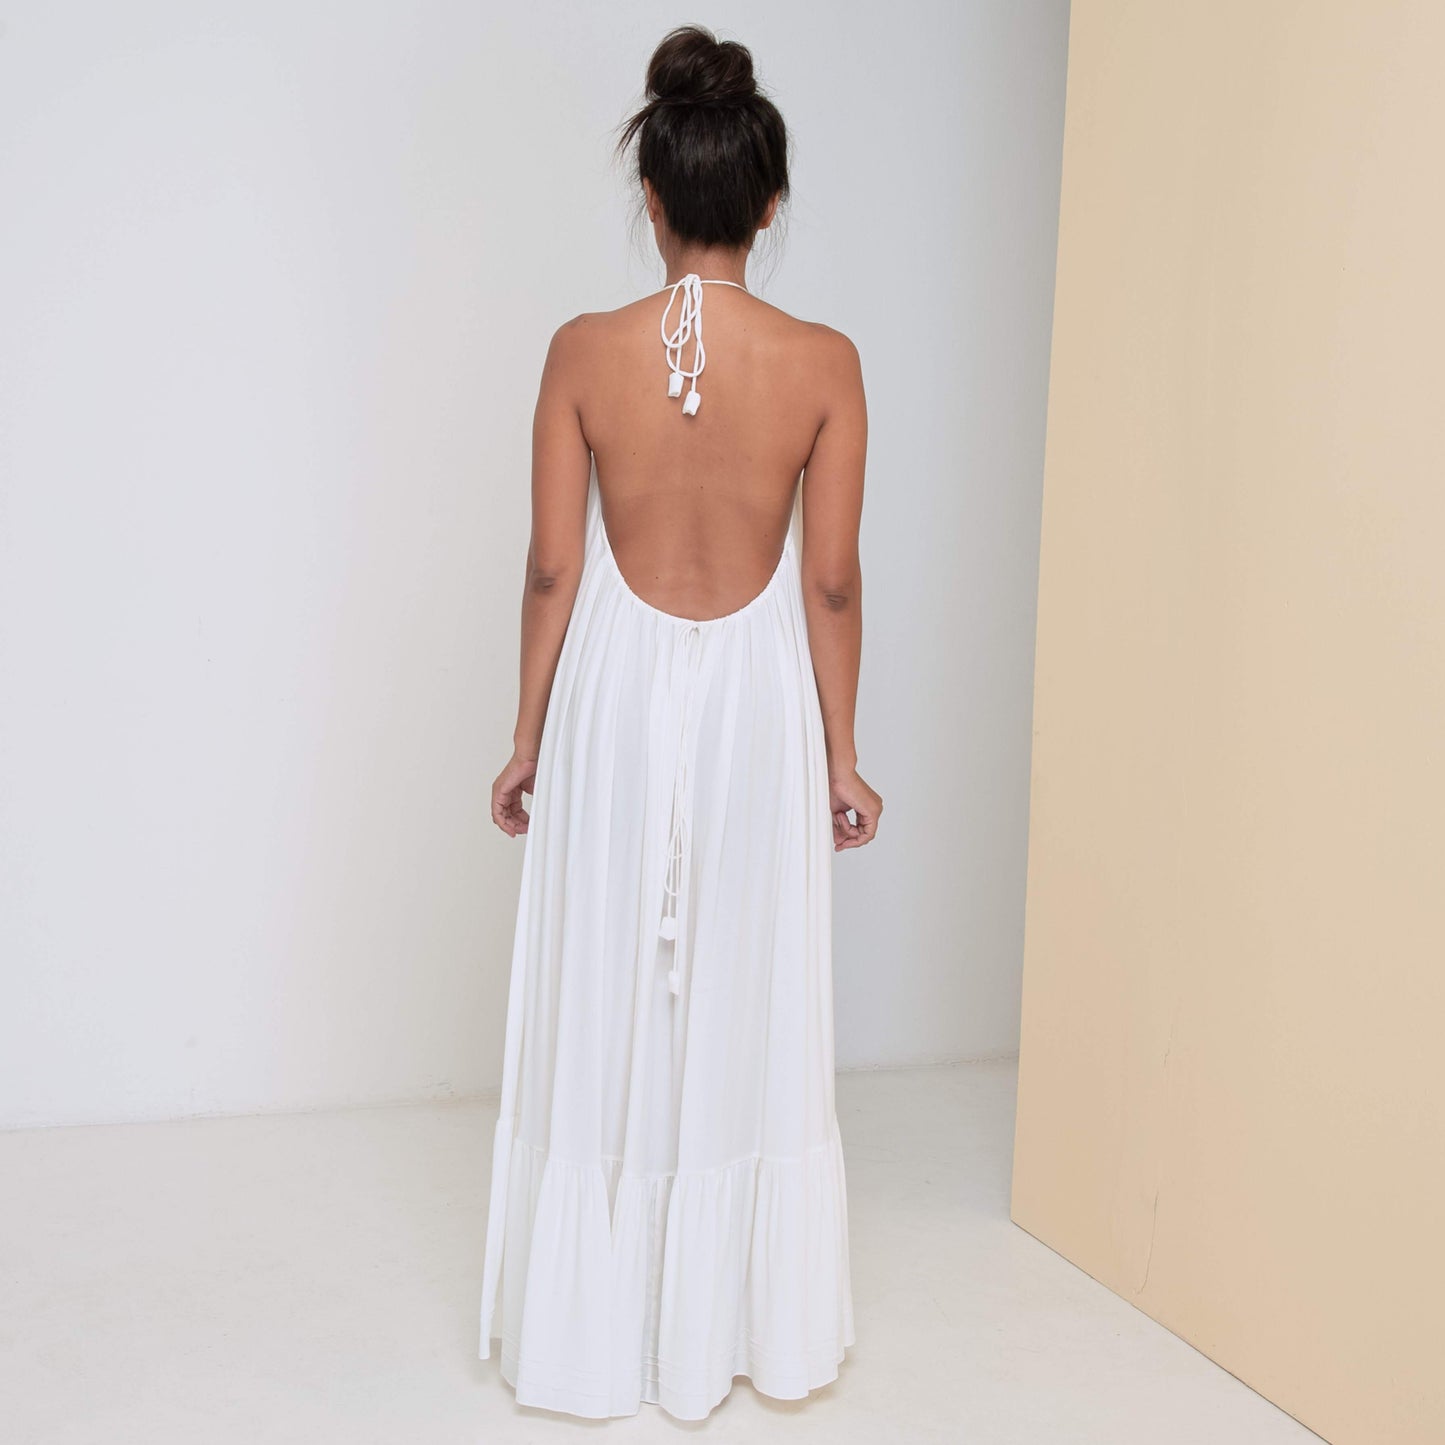 LONG BACKLESS RUFFLED DRESS - Rayon Fujette Crepe | Off White